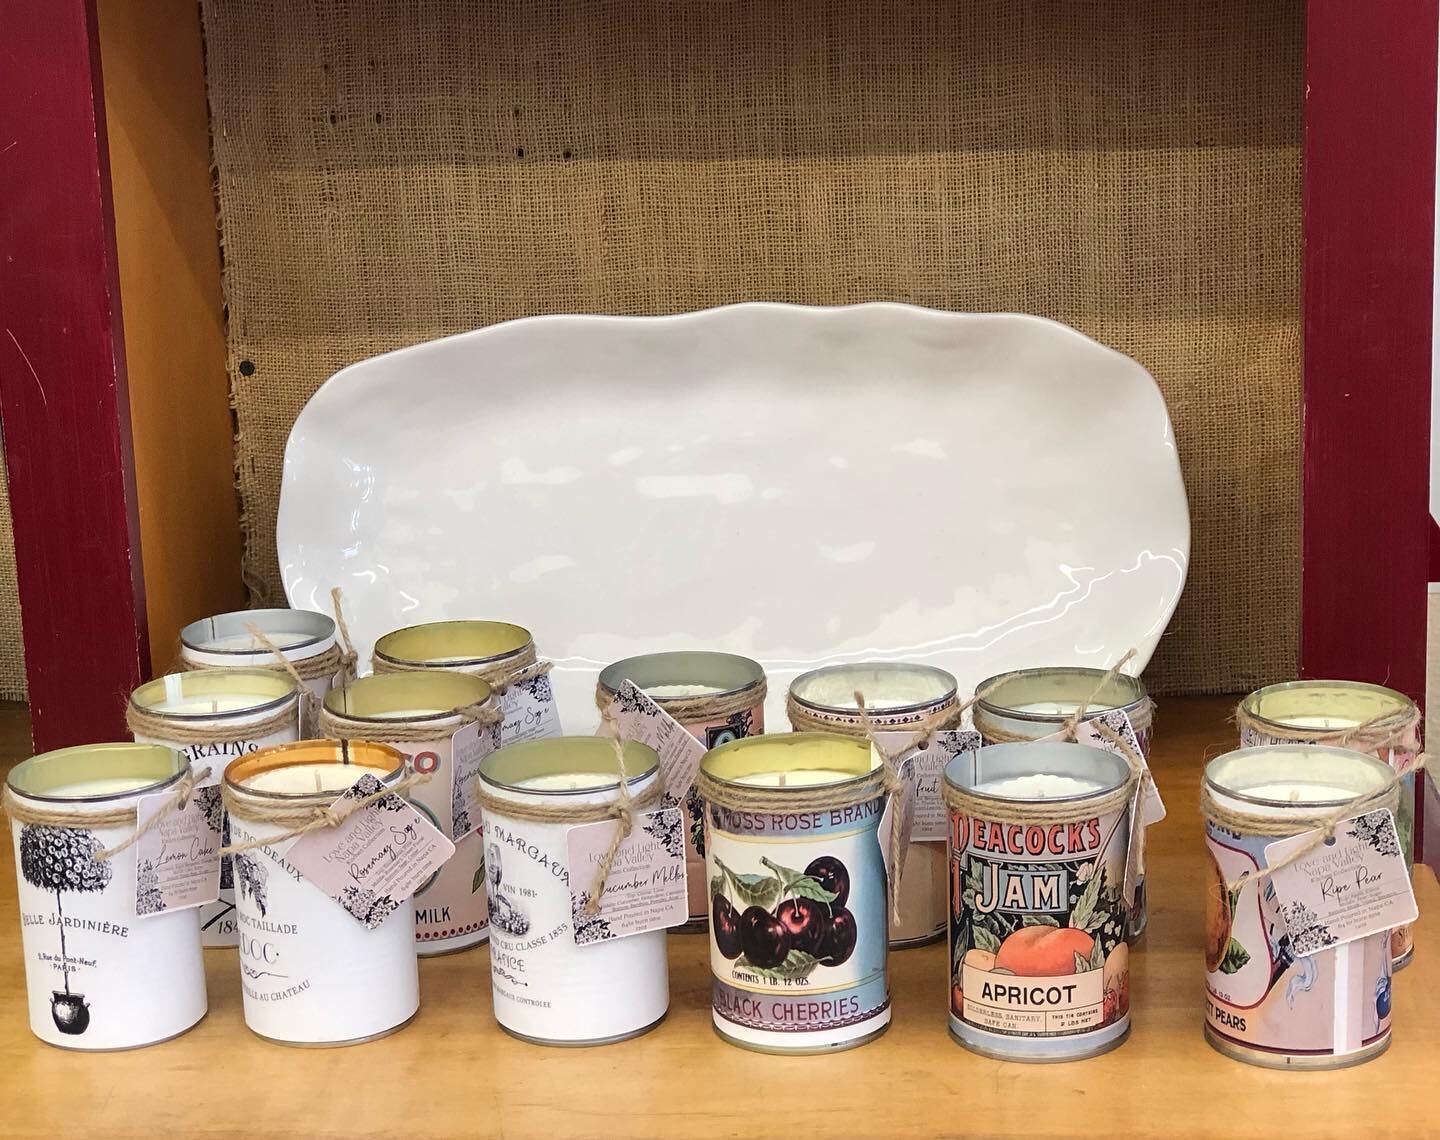 Our new kitchen candles in recycled vegetable cans with vintage labels.  Available in Rosemary Sage, Lemon Cake, Garden Mint, Peach Bellini, Grapefruit Spritz and Cucumber Melon. They are at The Corner Store in Sonoma!